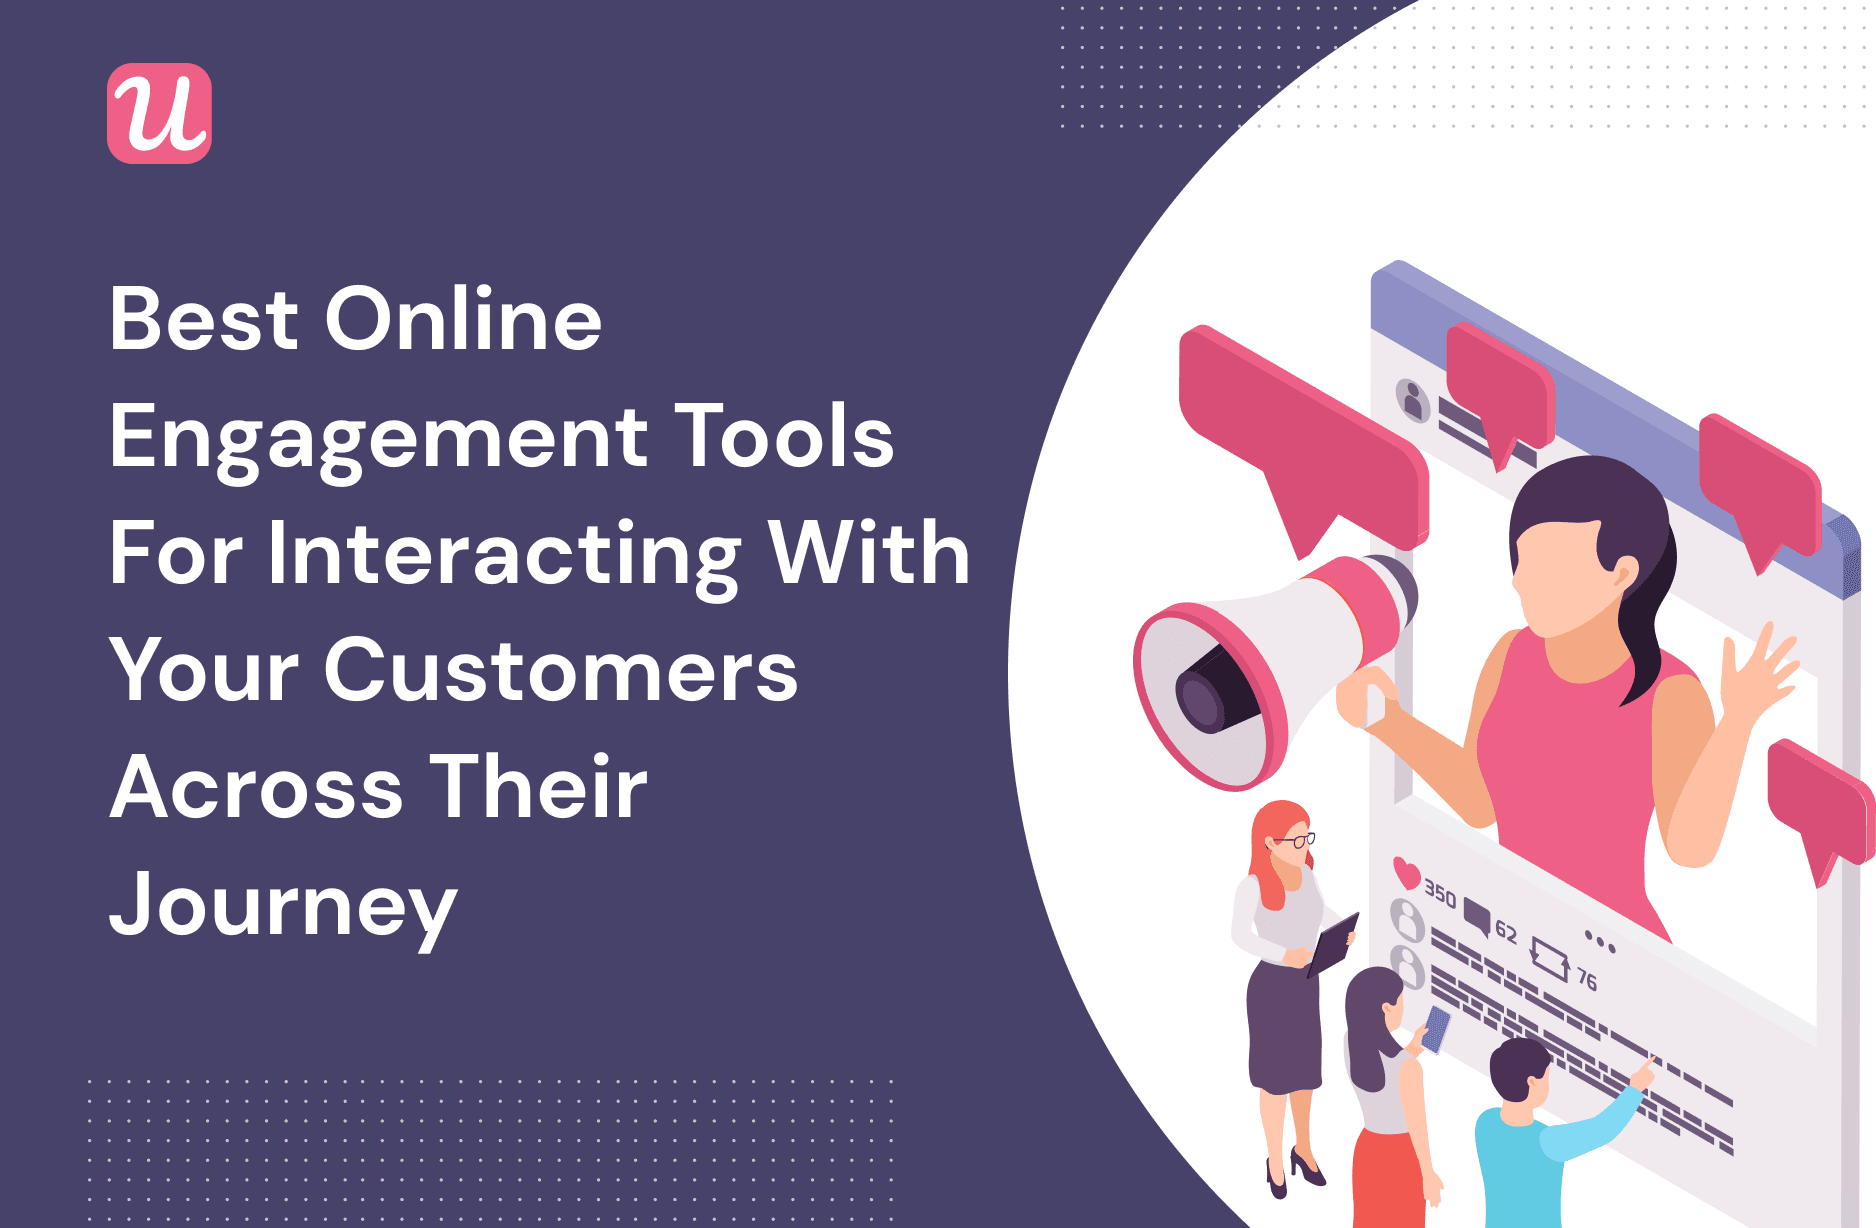 Best Online Engagement Tools For Interacting With Your Customers Across Their Journey